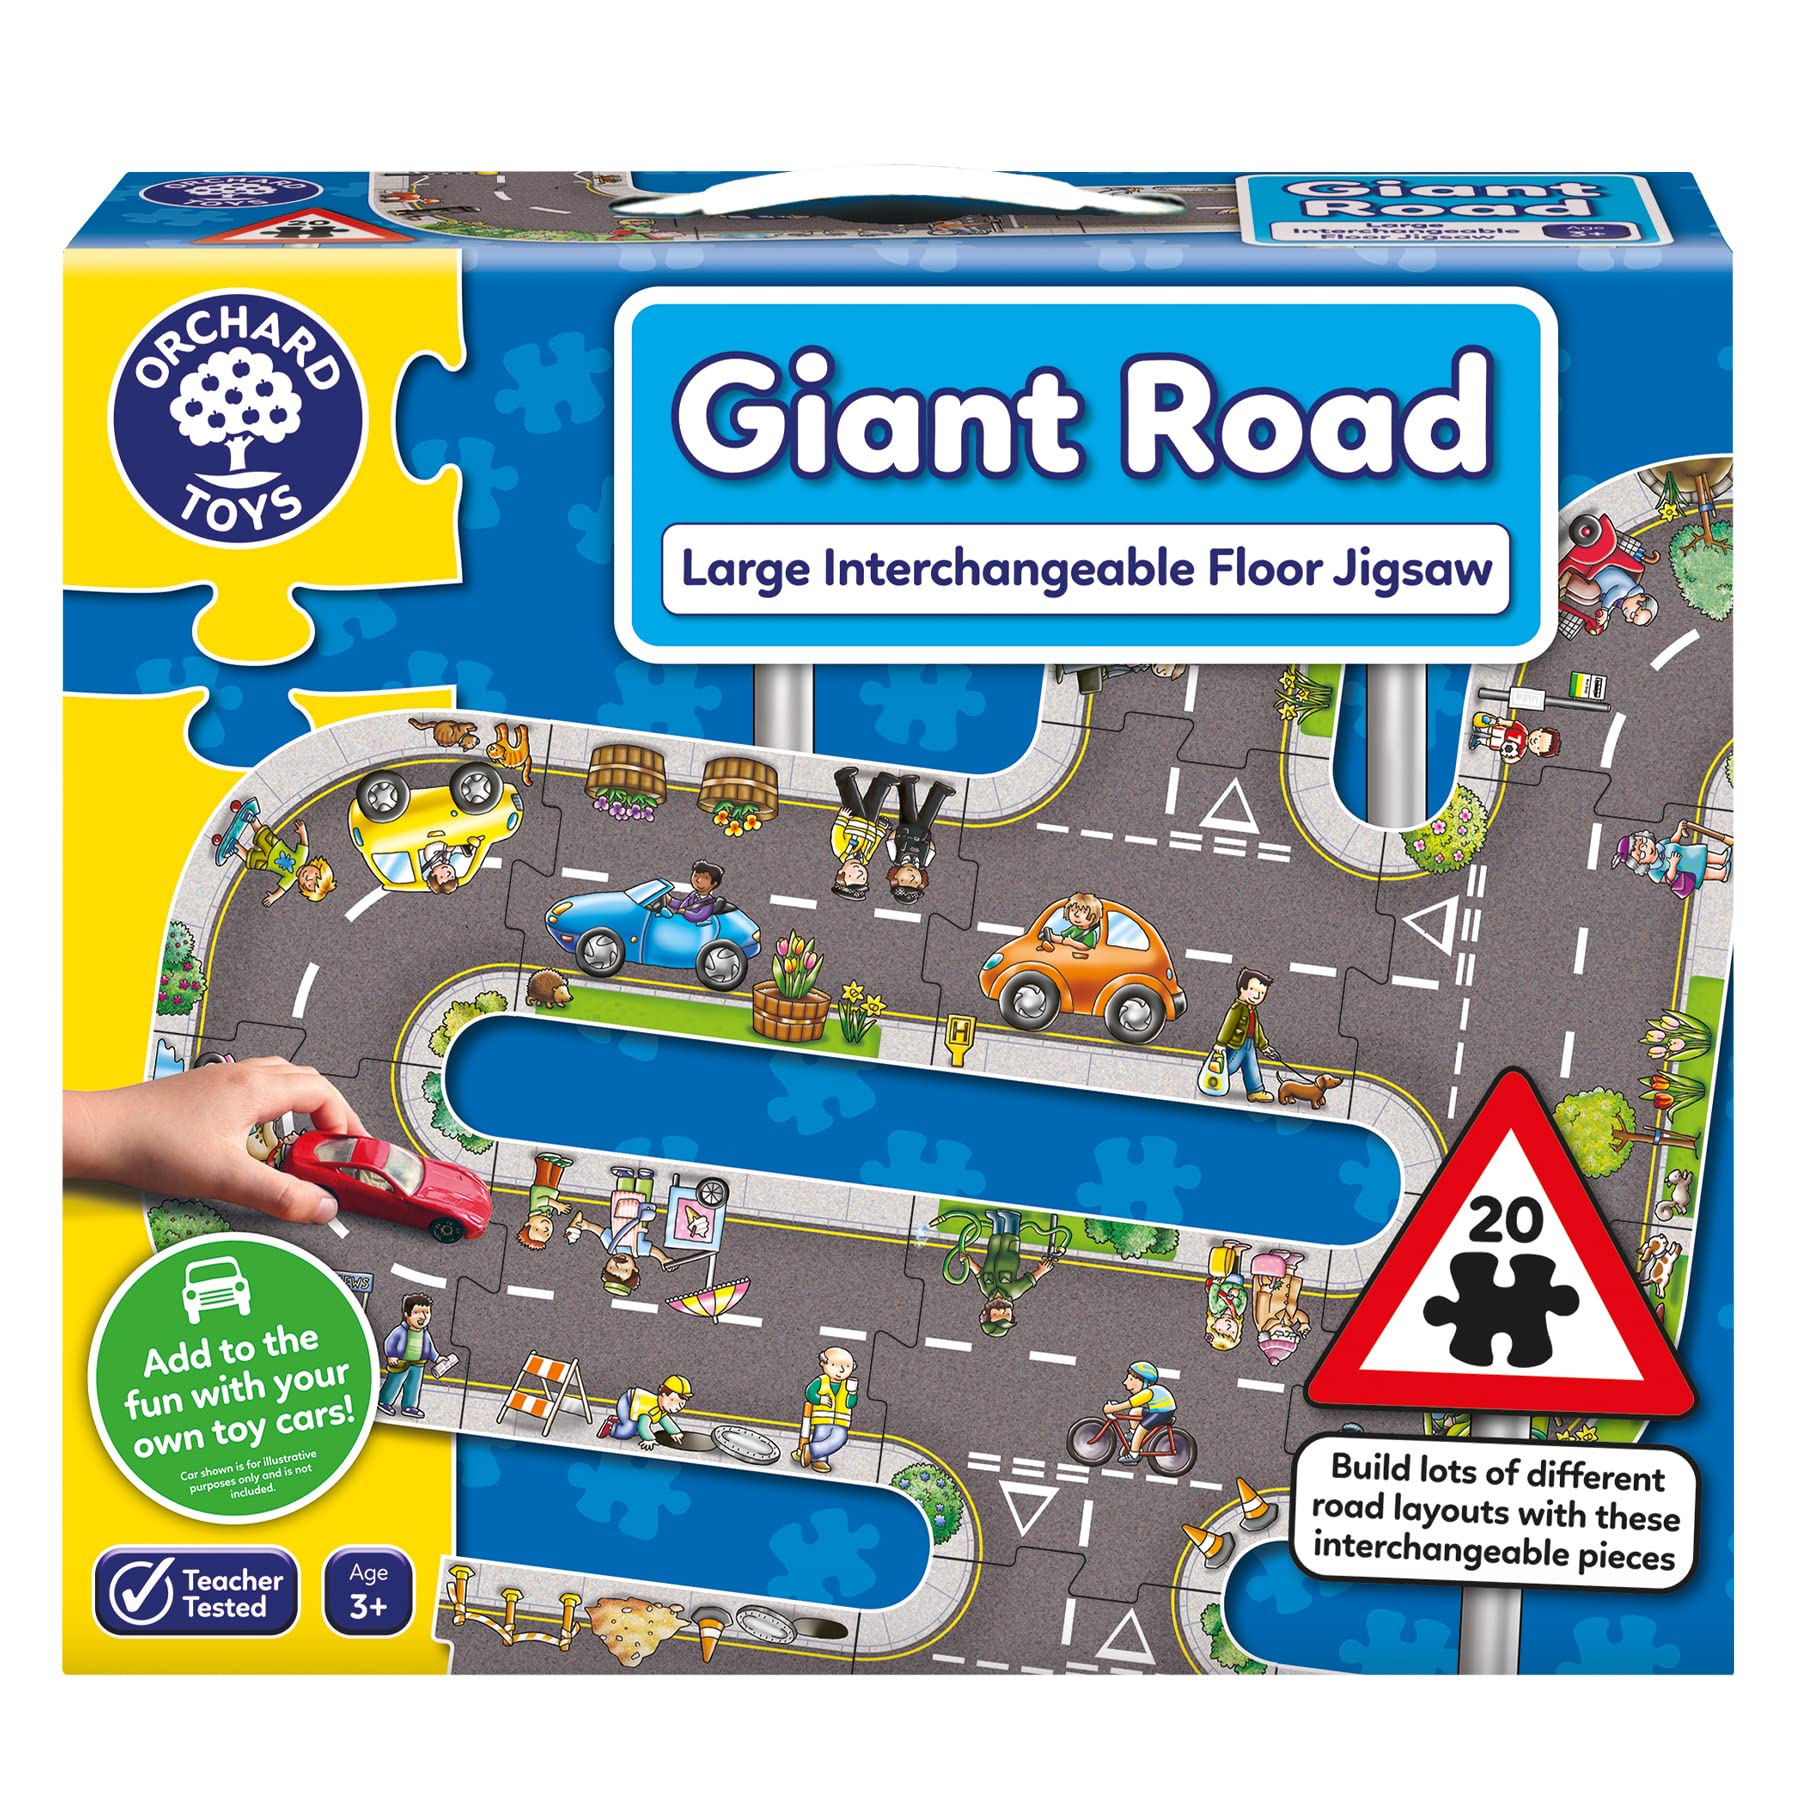 Orchard Toys Giant Road Jigsaw Puzzle, Car Track on a Large Floor Puzzle, Car Play Mat, Make Your Own Road Tape for Toy Cars, City, Construction, Educational Toys for Kids and Toddlers Age 3+